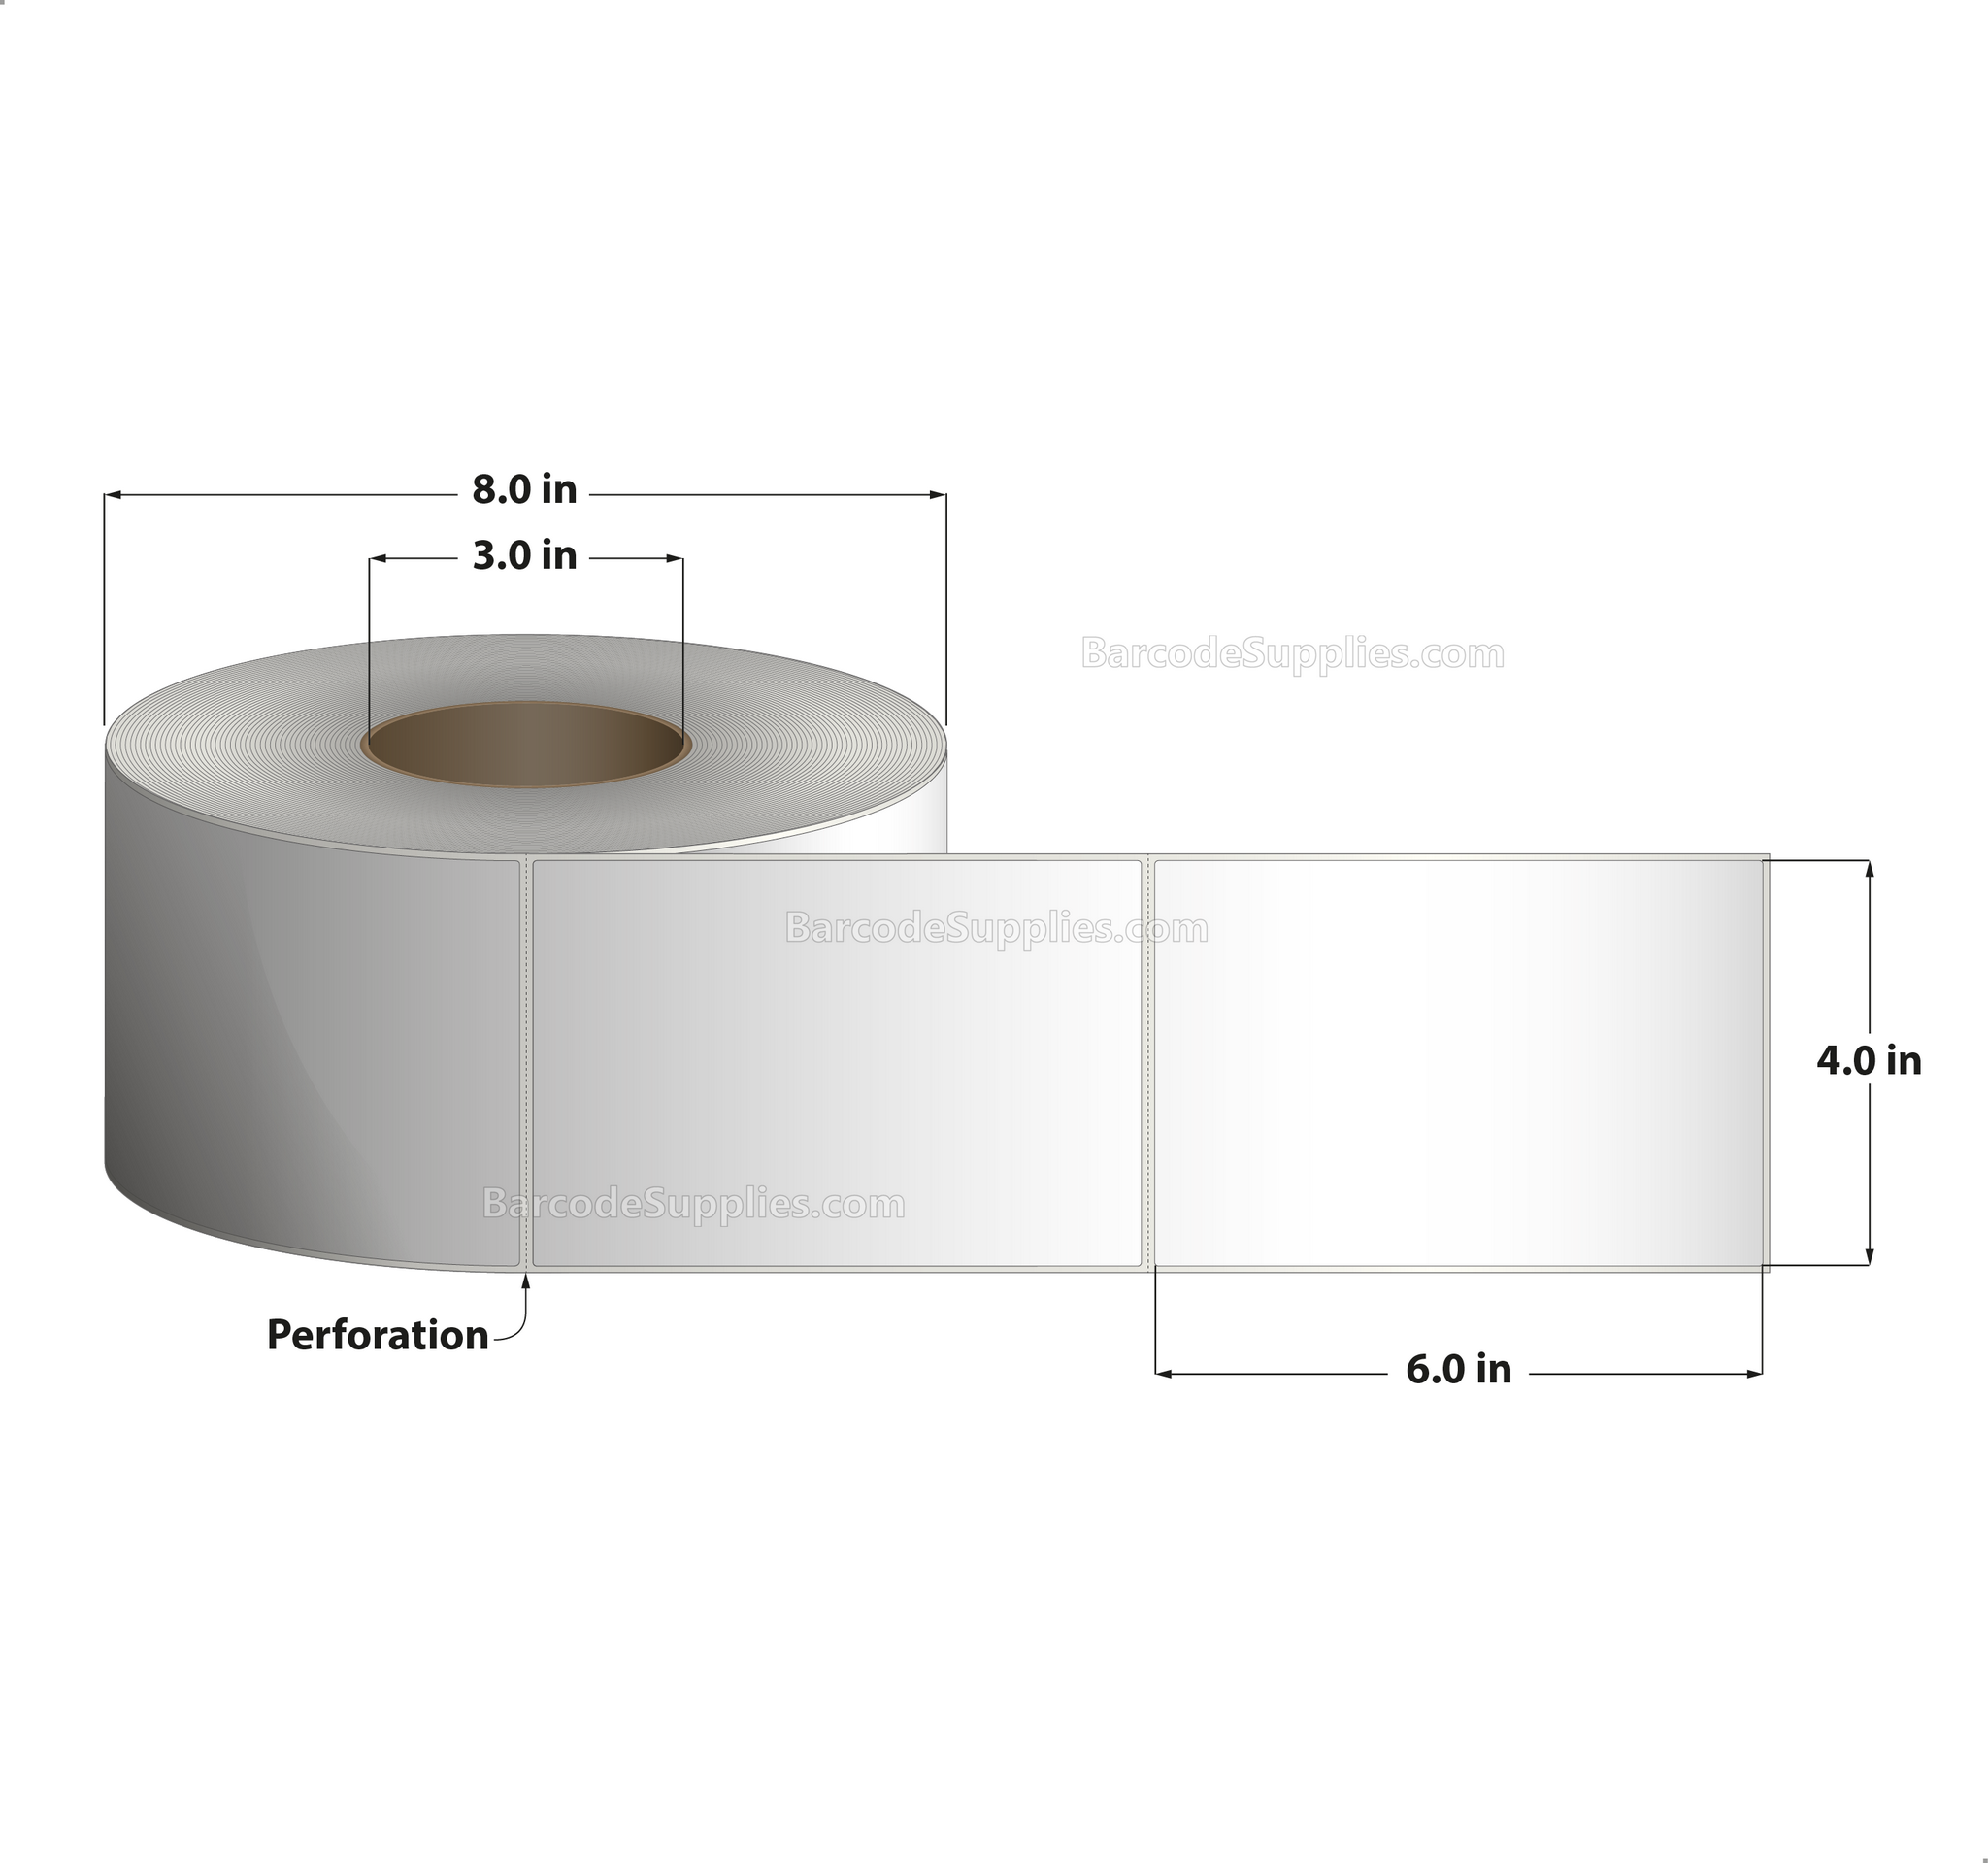 4 x 6 Thermal Transfer White Labels With Permanent Acrylic Adhesive - Perforated - 1000 Labels Per Roll - Carton Of 4 Rolls - 4000 Labels Total - MPN: TH46-1PPL***